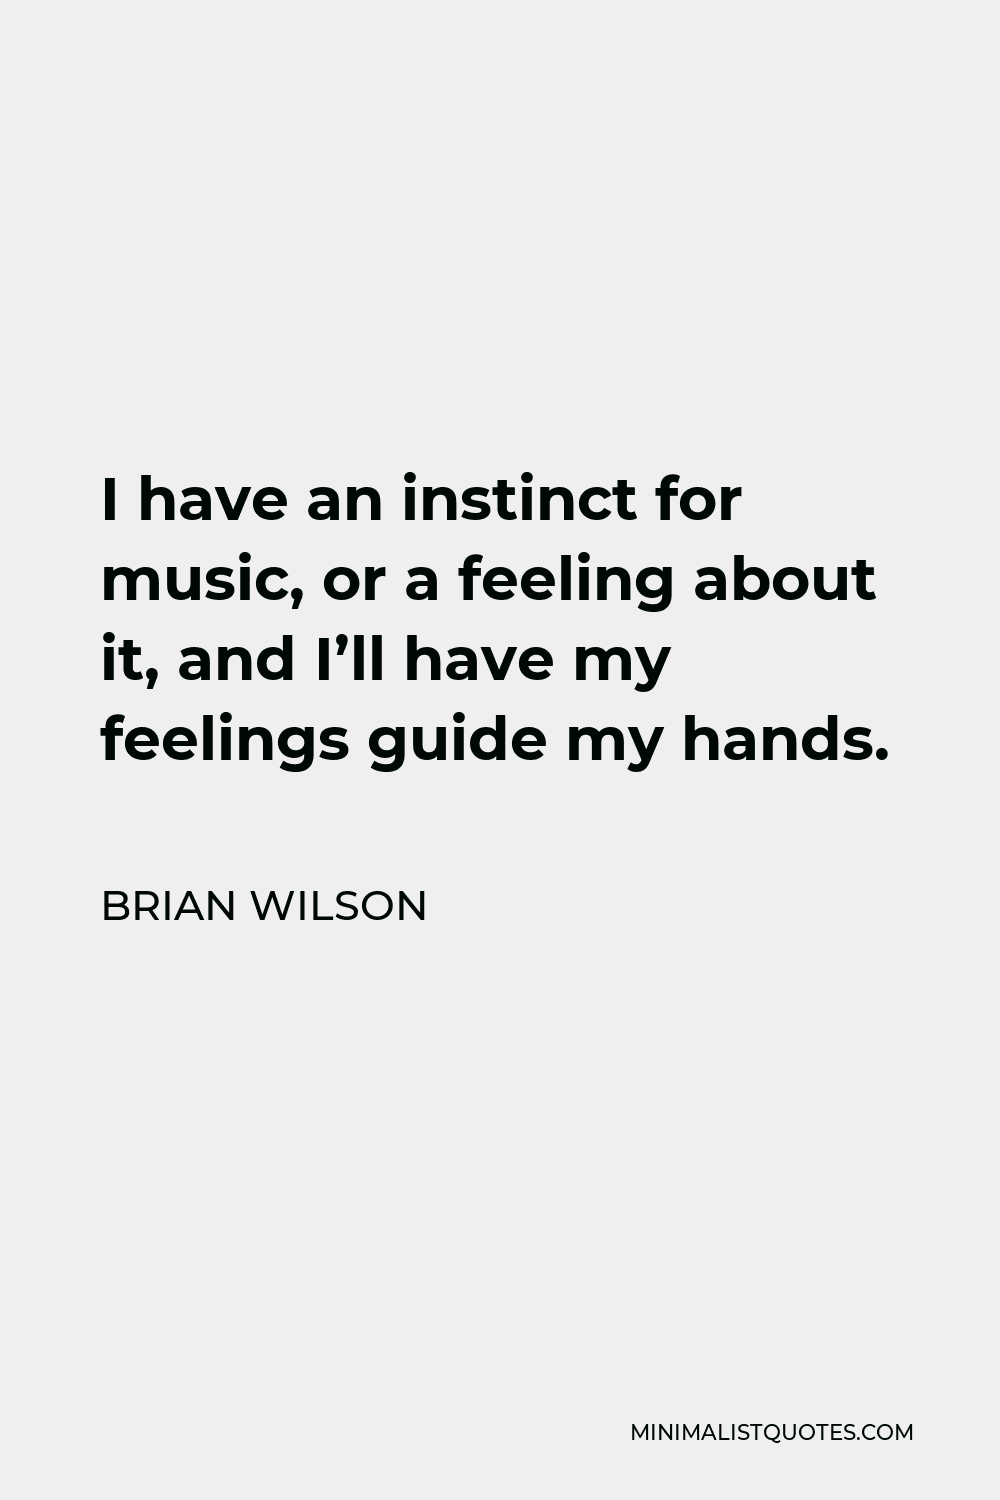 Brian Wilson Quote - I have an instinct for music, or a feeling about it, and I’ll have my feelings guide my hands.